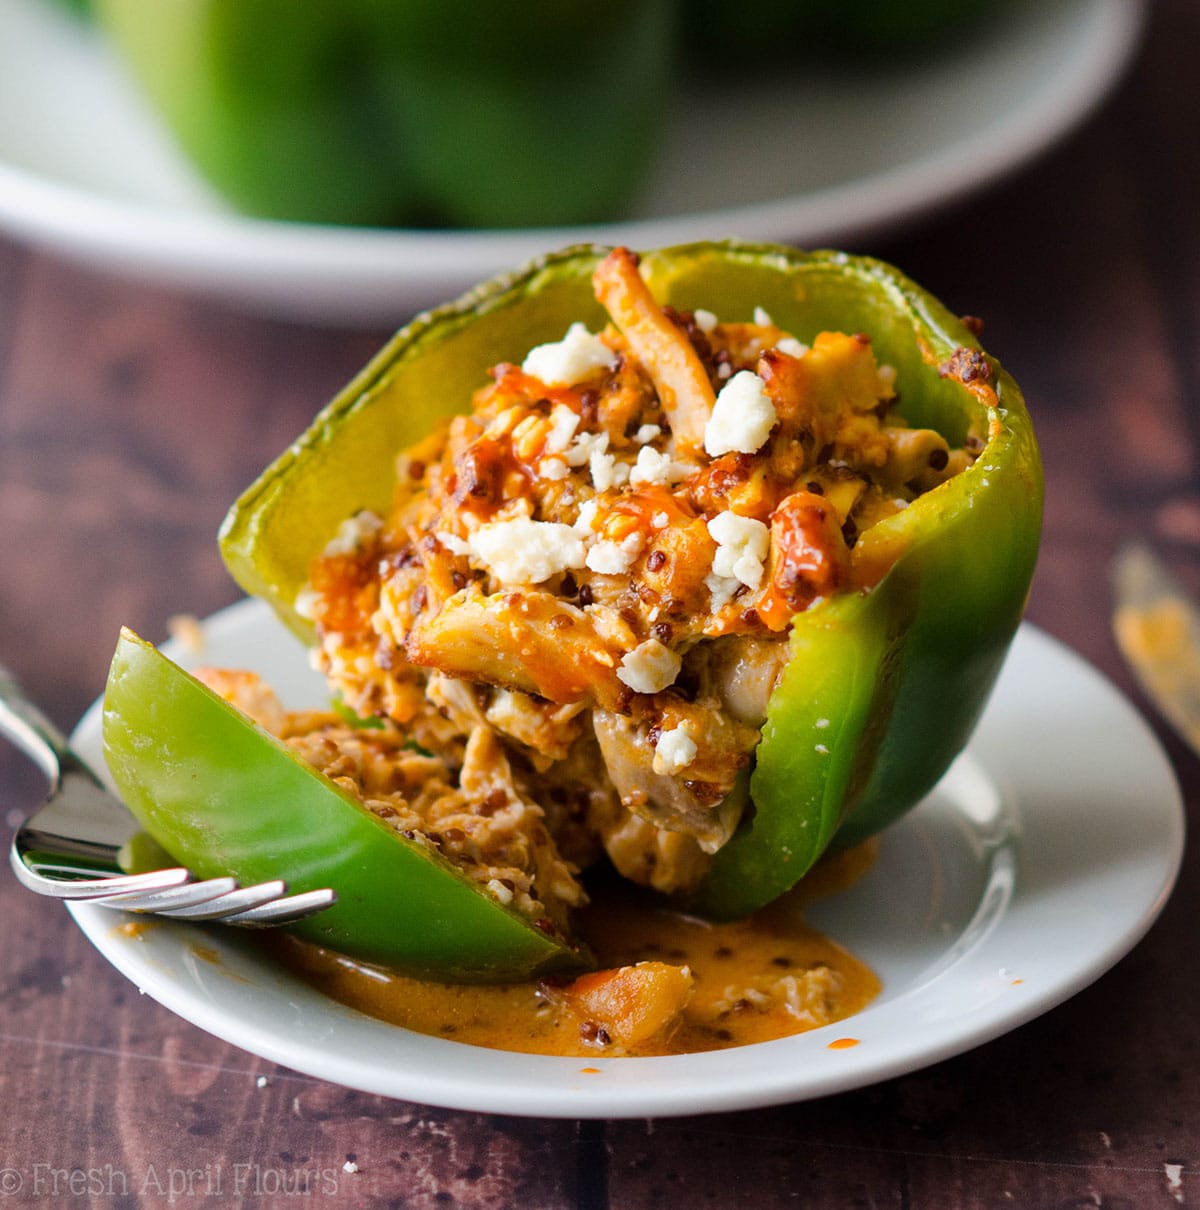 Buffalo Chicken Stuffed Peppers: An easy, make-ahead weeknight meal that makes great leftovers and can be easily doubled to feed a crowd or larger family.